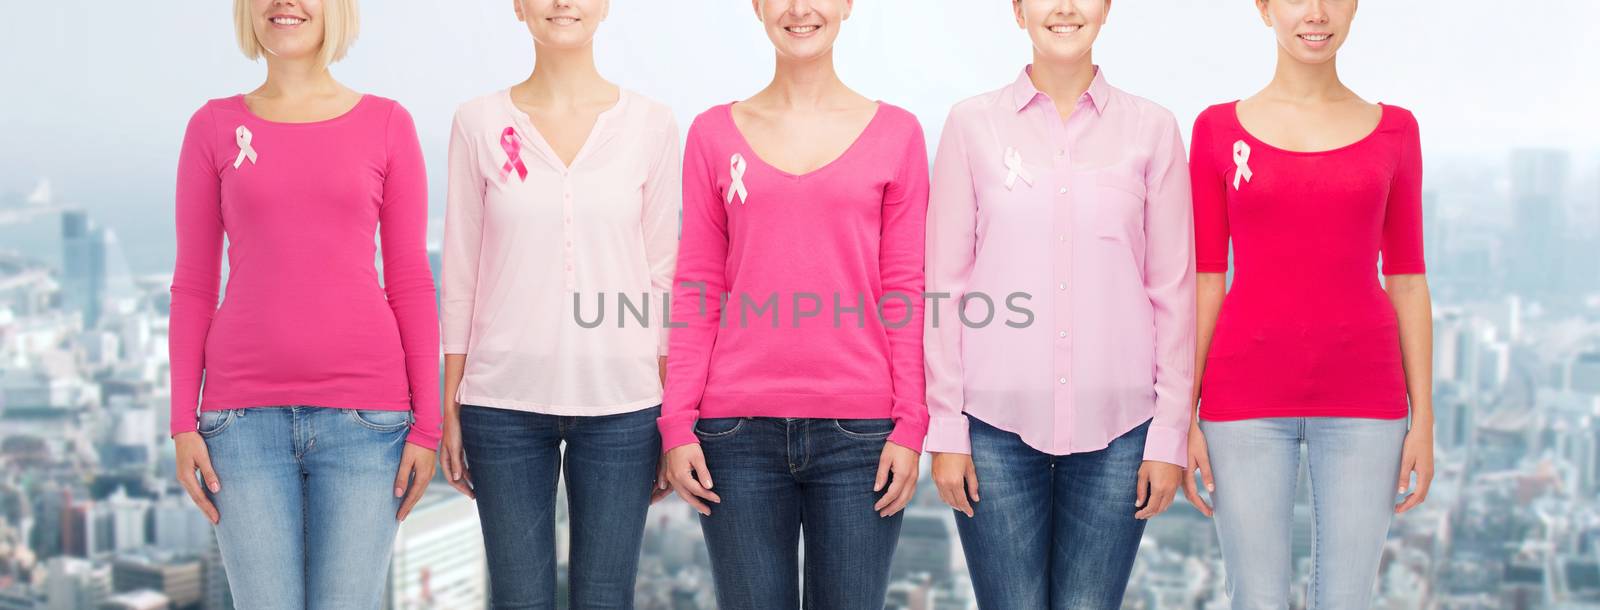 healthcare, people and medicine concept - close up of smiling women in blank shirts with pink breast cancer awareness ribbons over city background